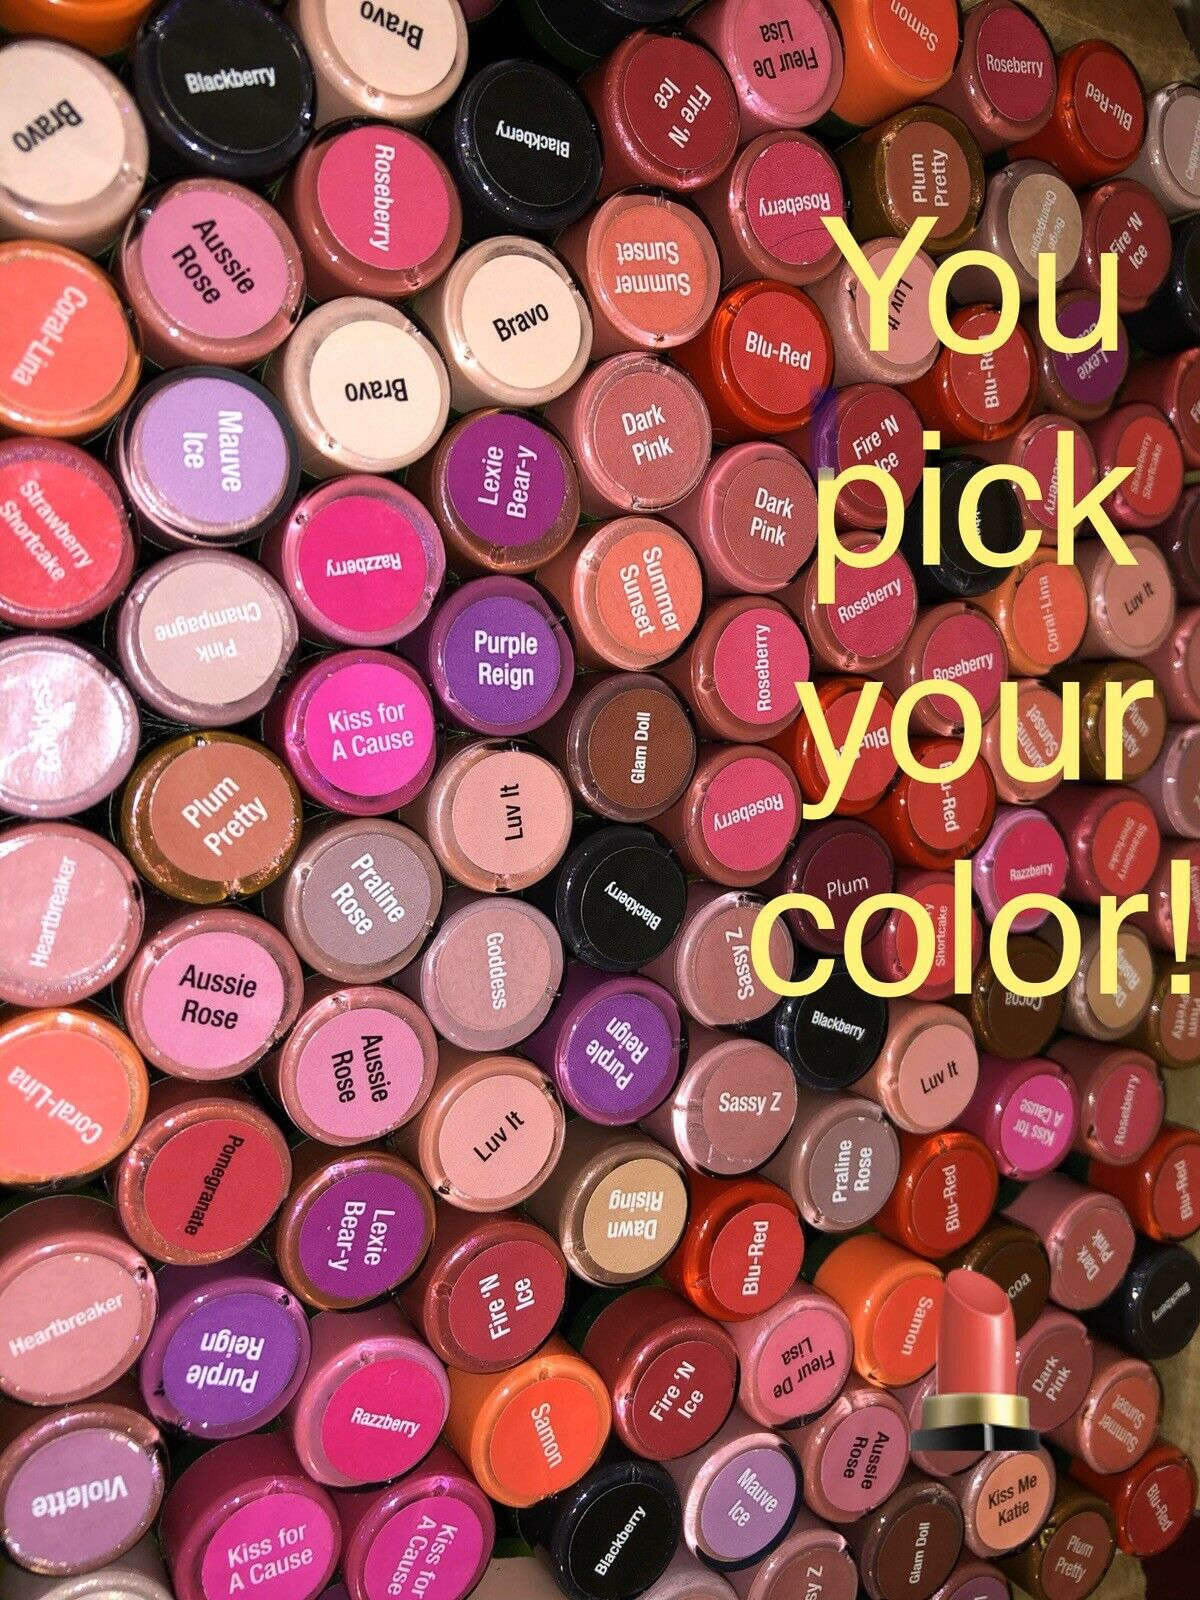 Lipsense Lipstick By Senegence Full Size .25 ** You Pick Your Color Or Gloss !!